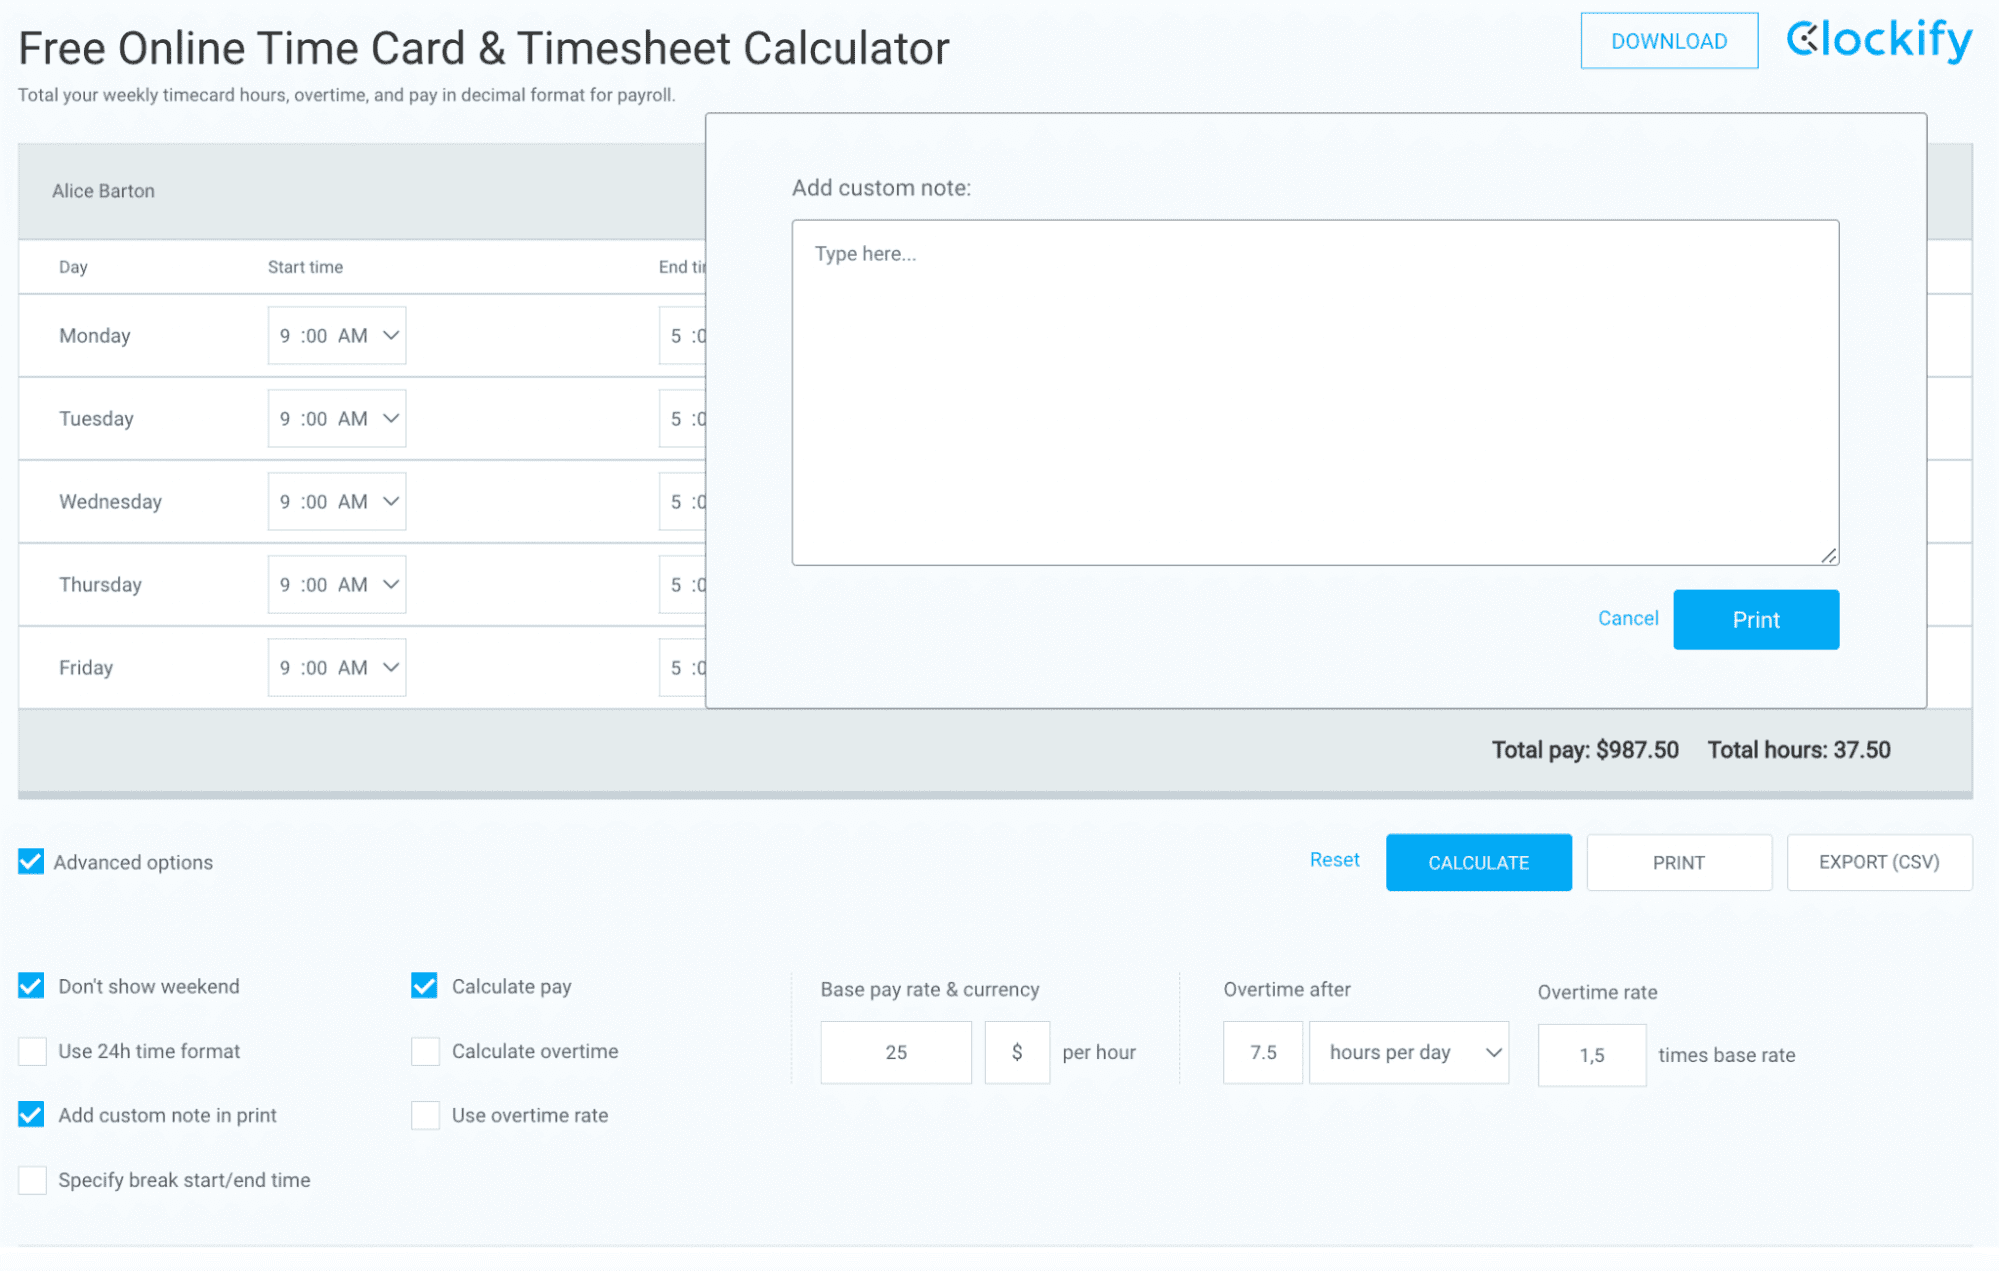 Customize the time card in the time card calculator